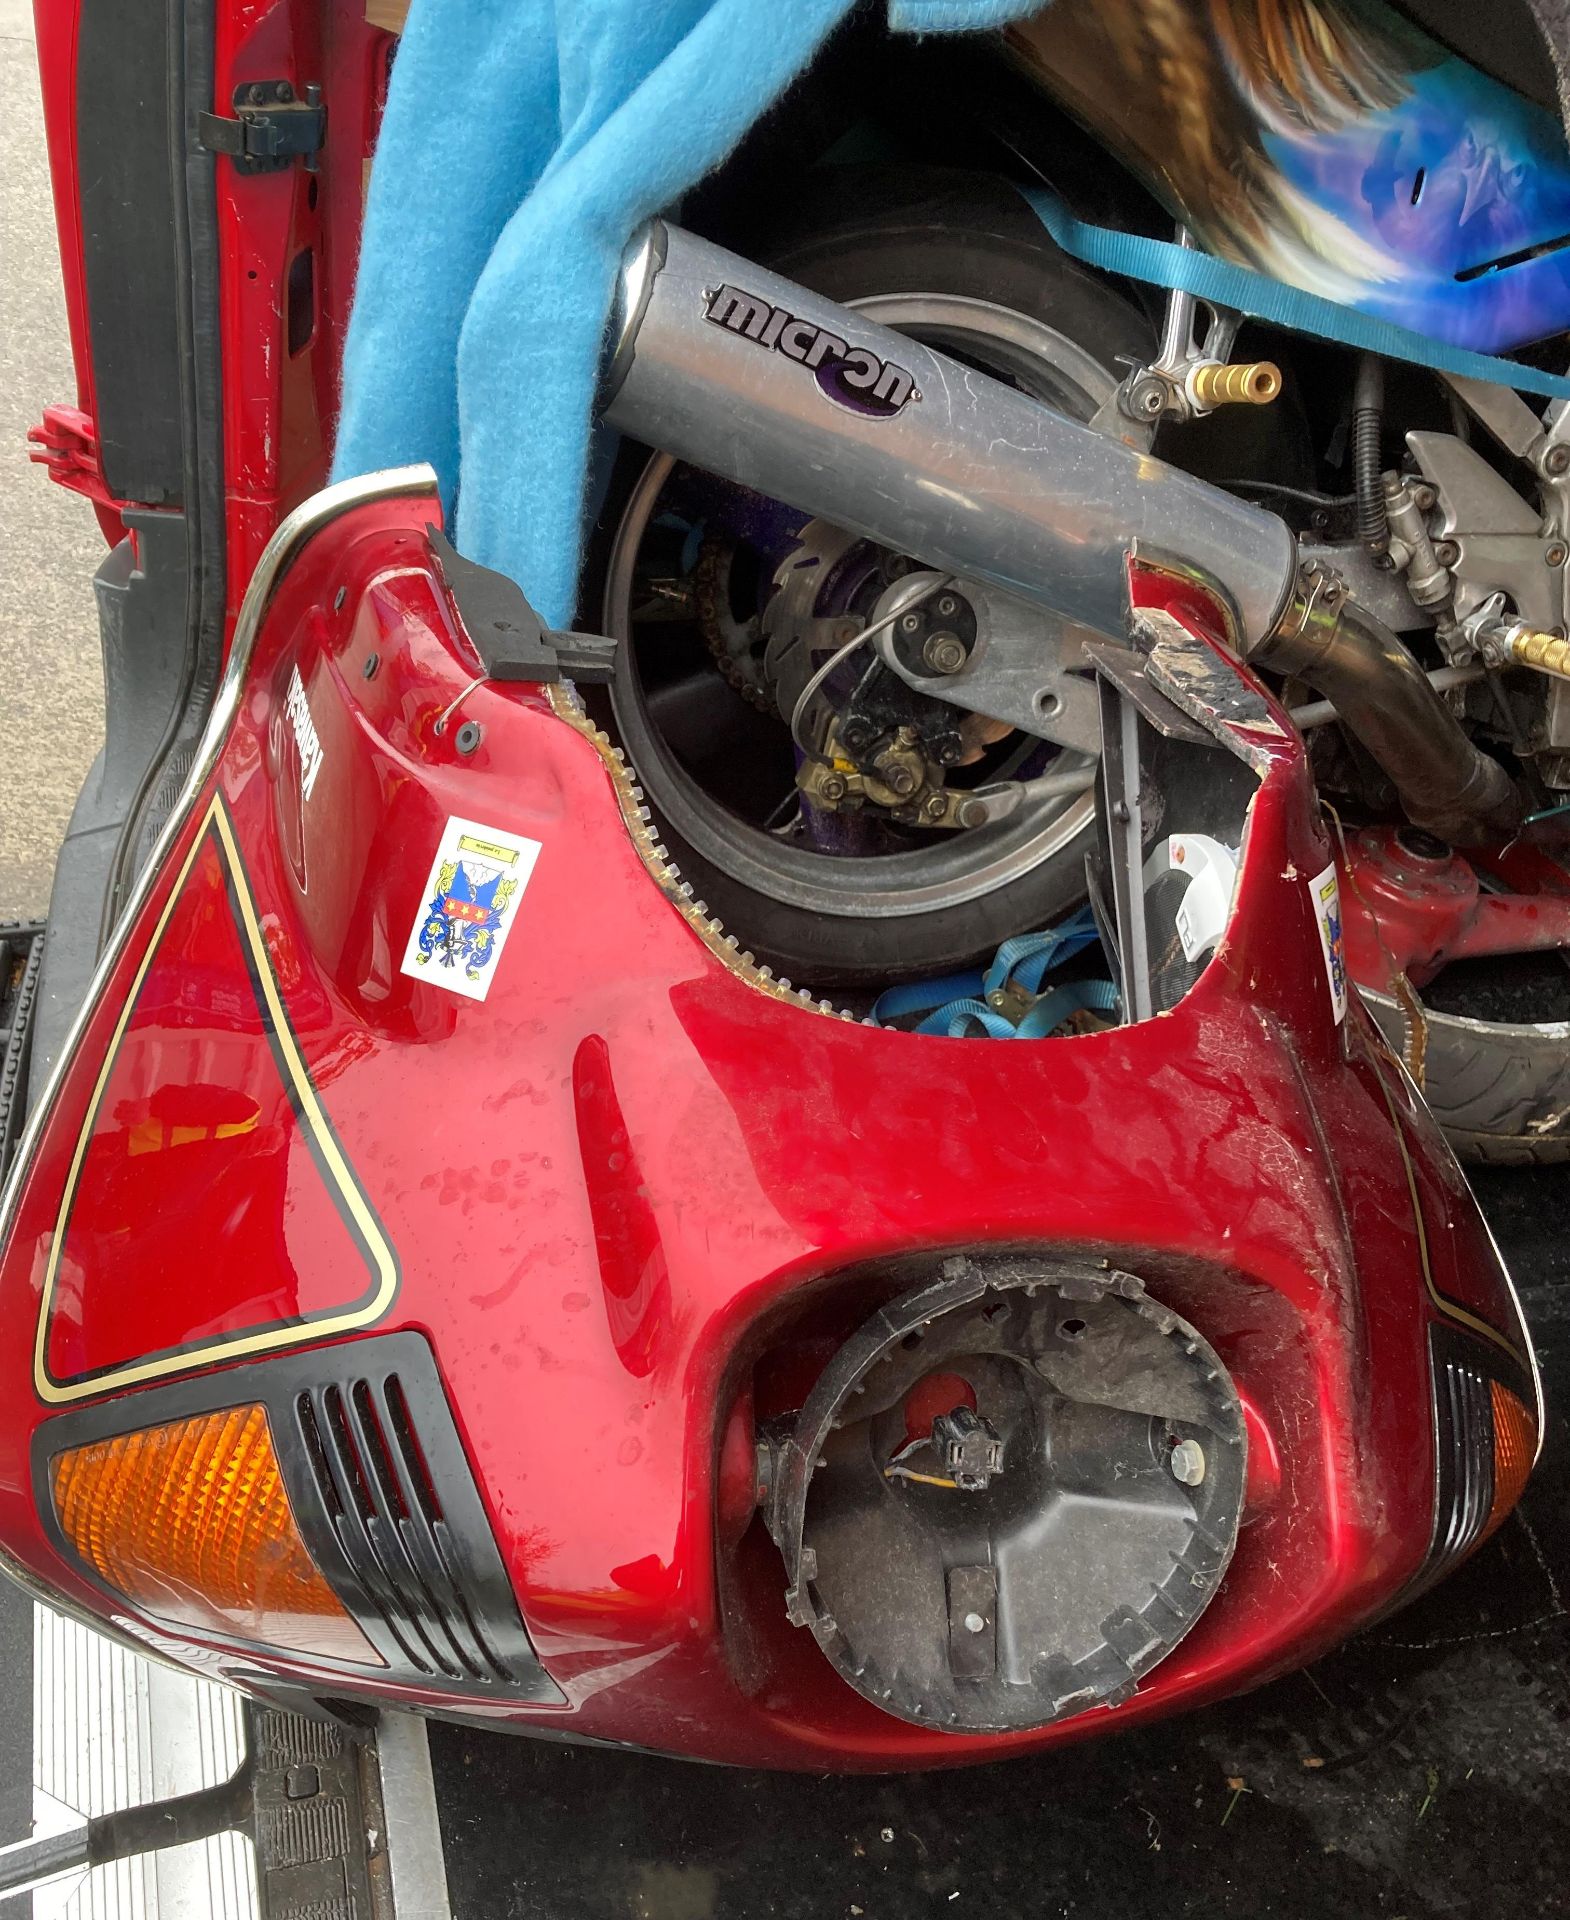 KAWASAKI 1015cc MOTORCYCLE - Petrol - Red. Sold as a project restoration/spares/repairs. - Image 3 of 11